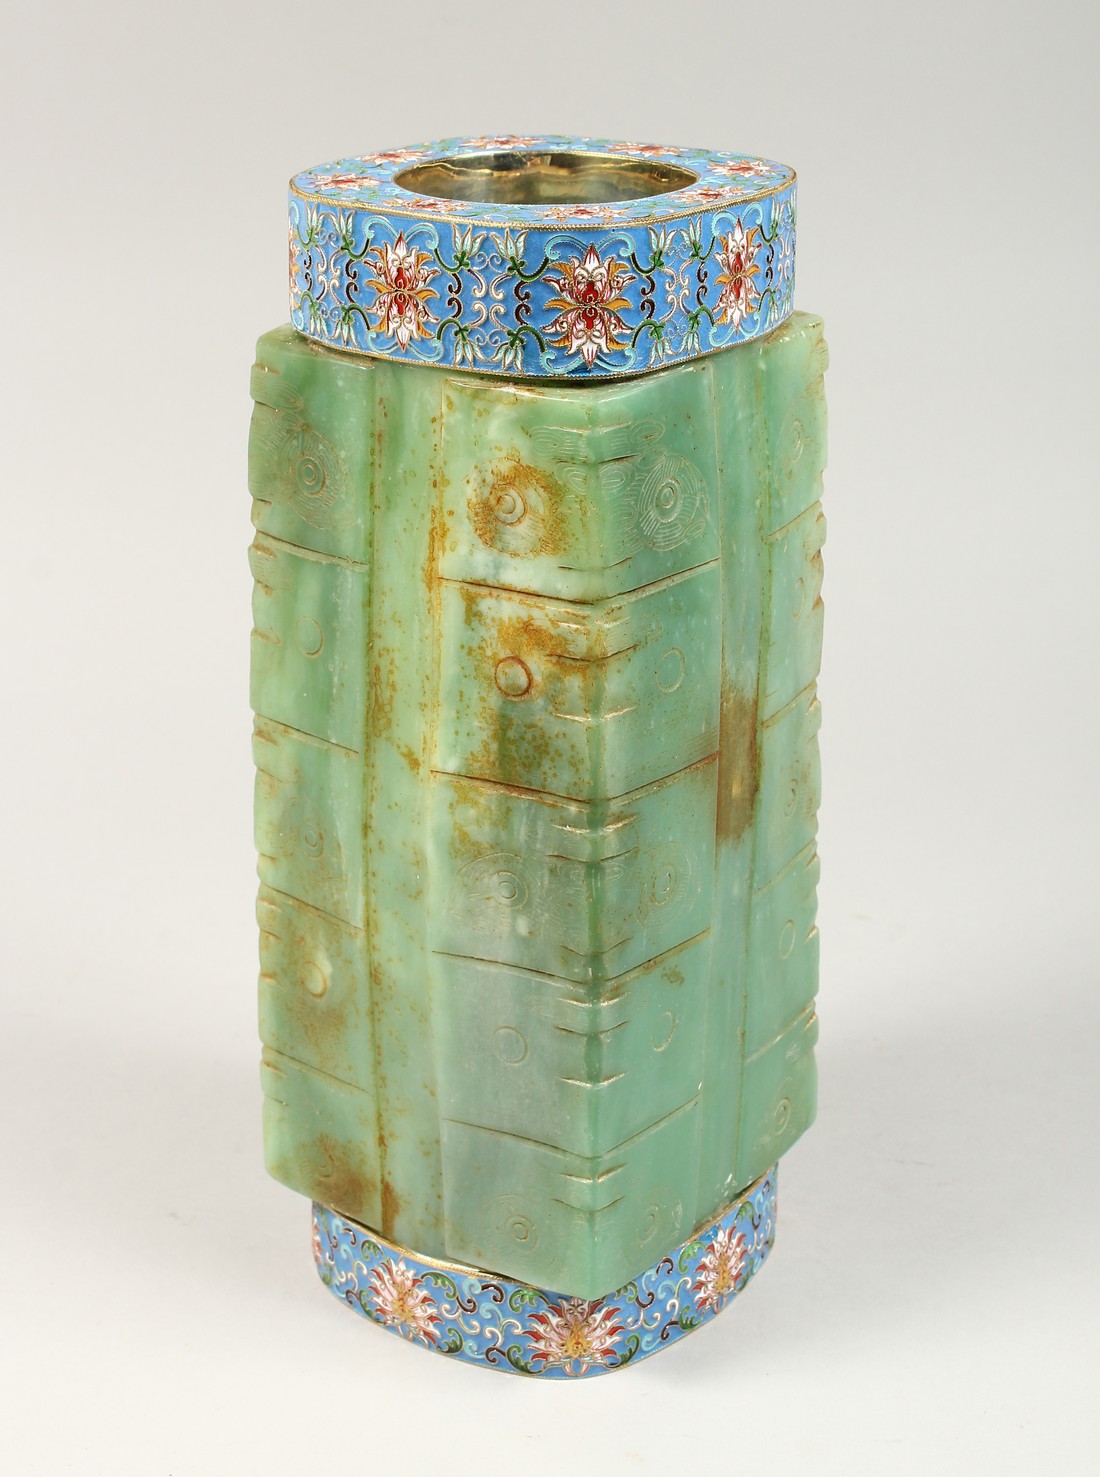 A SUPERB LARGE RUSSIAN JADE AND CLOISSONE ENAMEL VASE 12ins high.